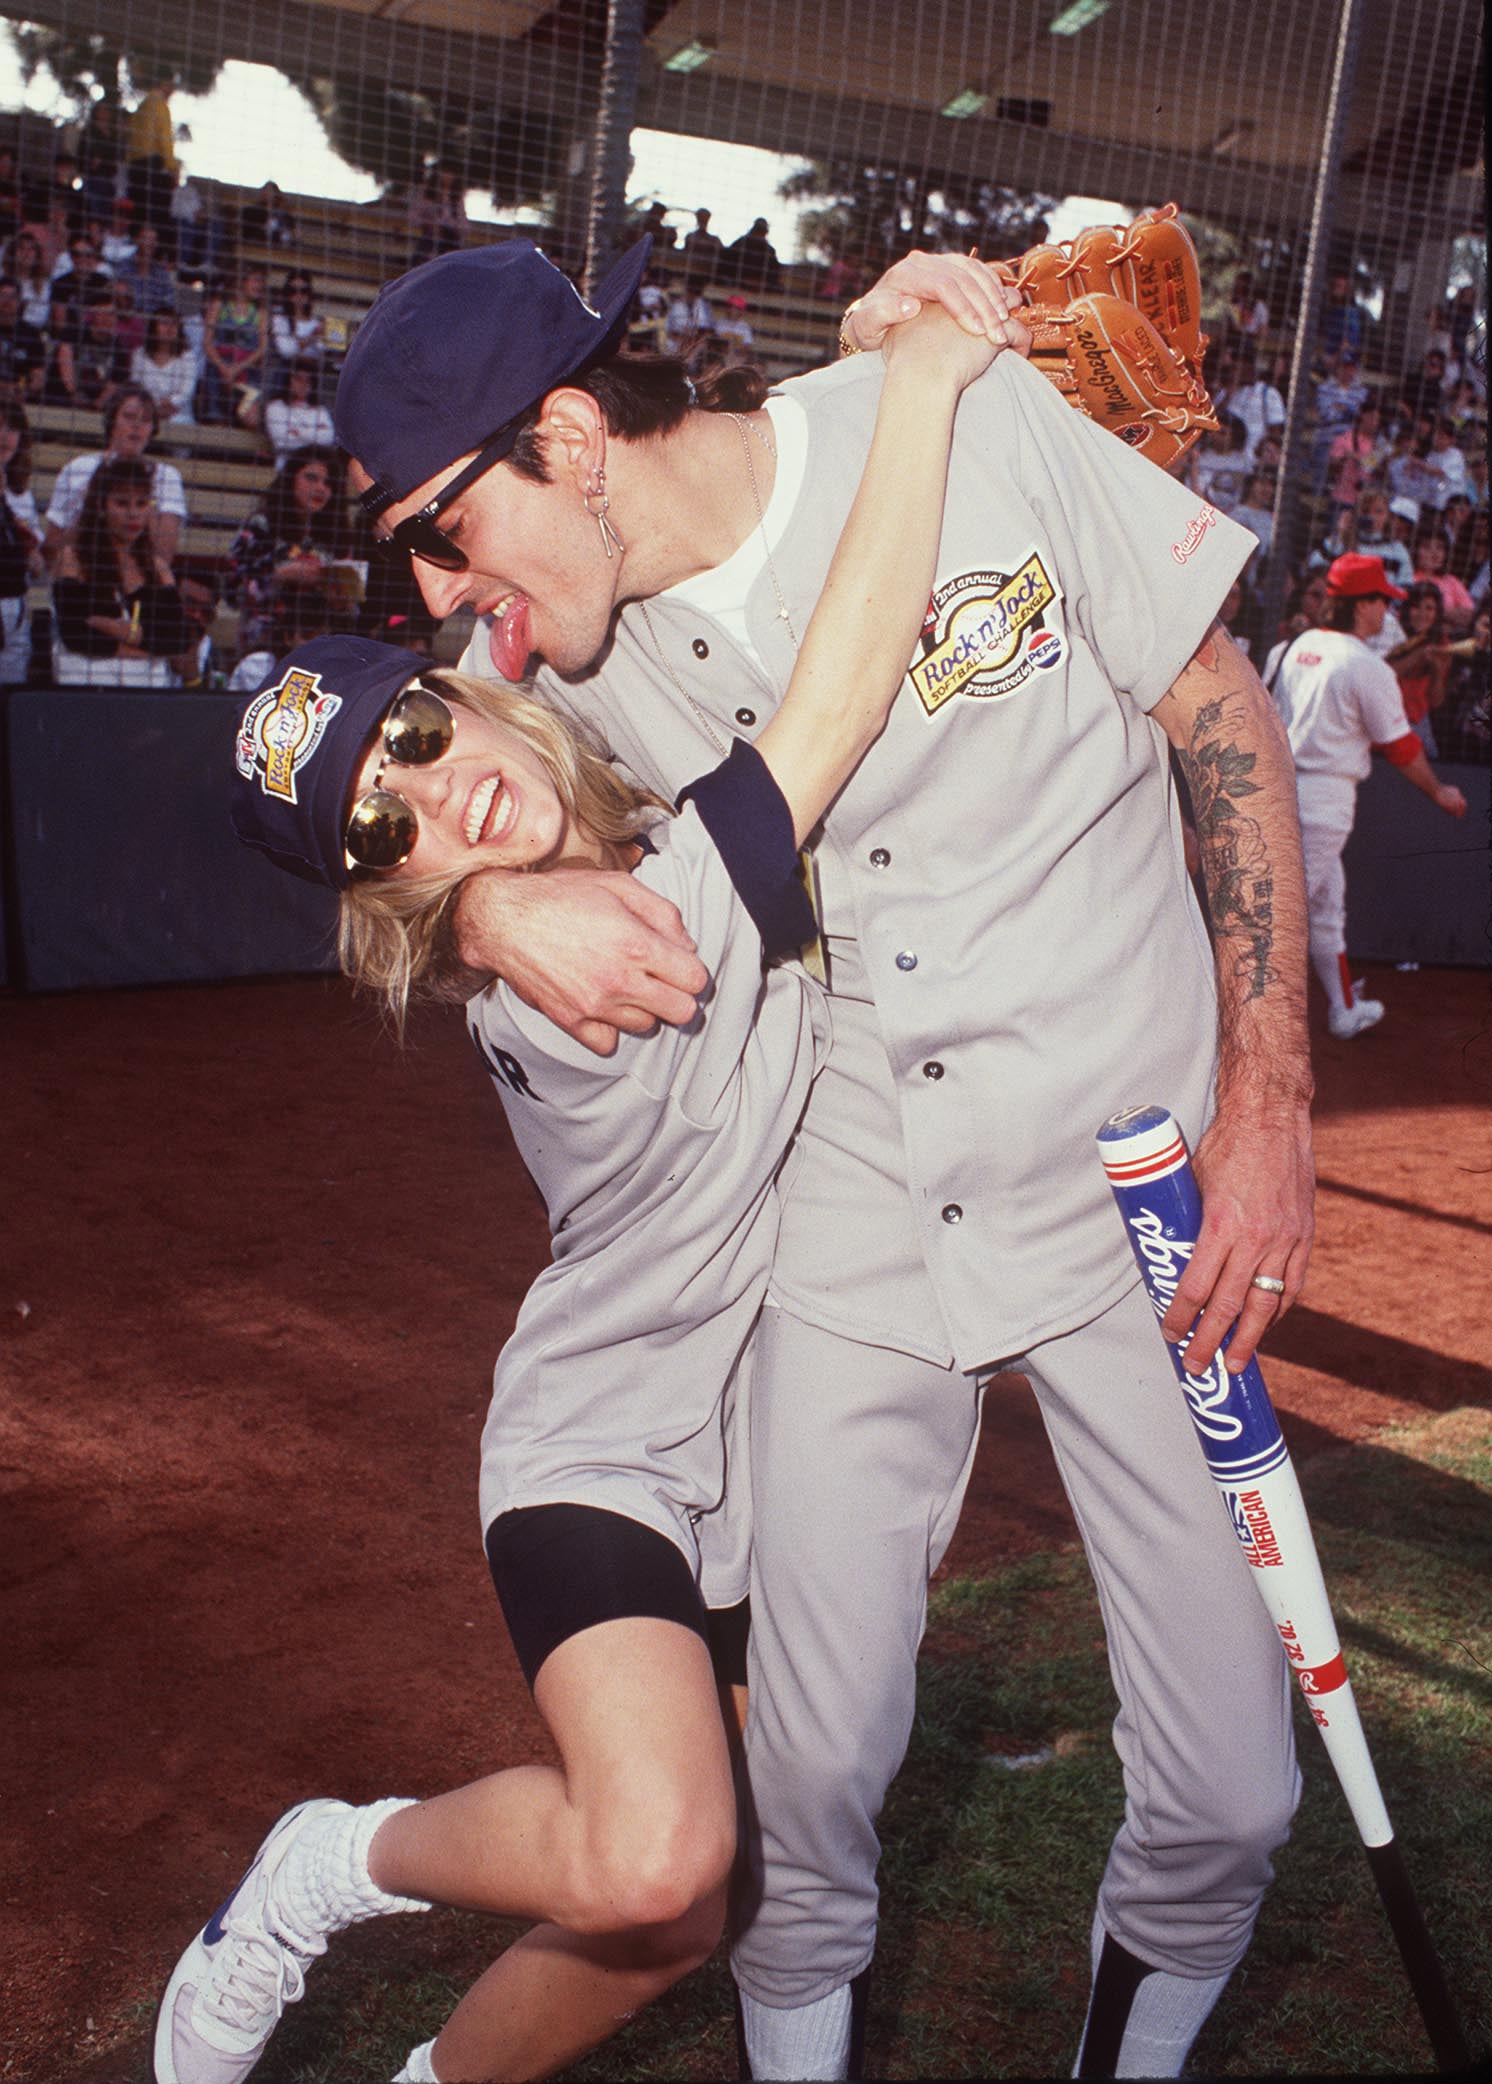 Tommy Lee & Heather Locklear at the USC Baseball Field in Los Angeles, California (Photo by Steve Granitz/WireImage)